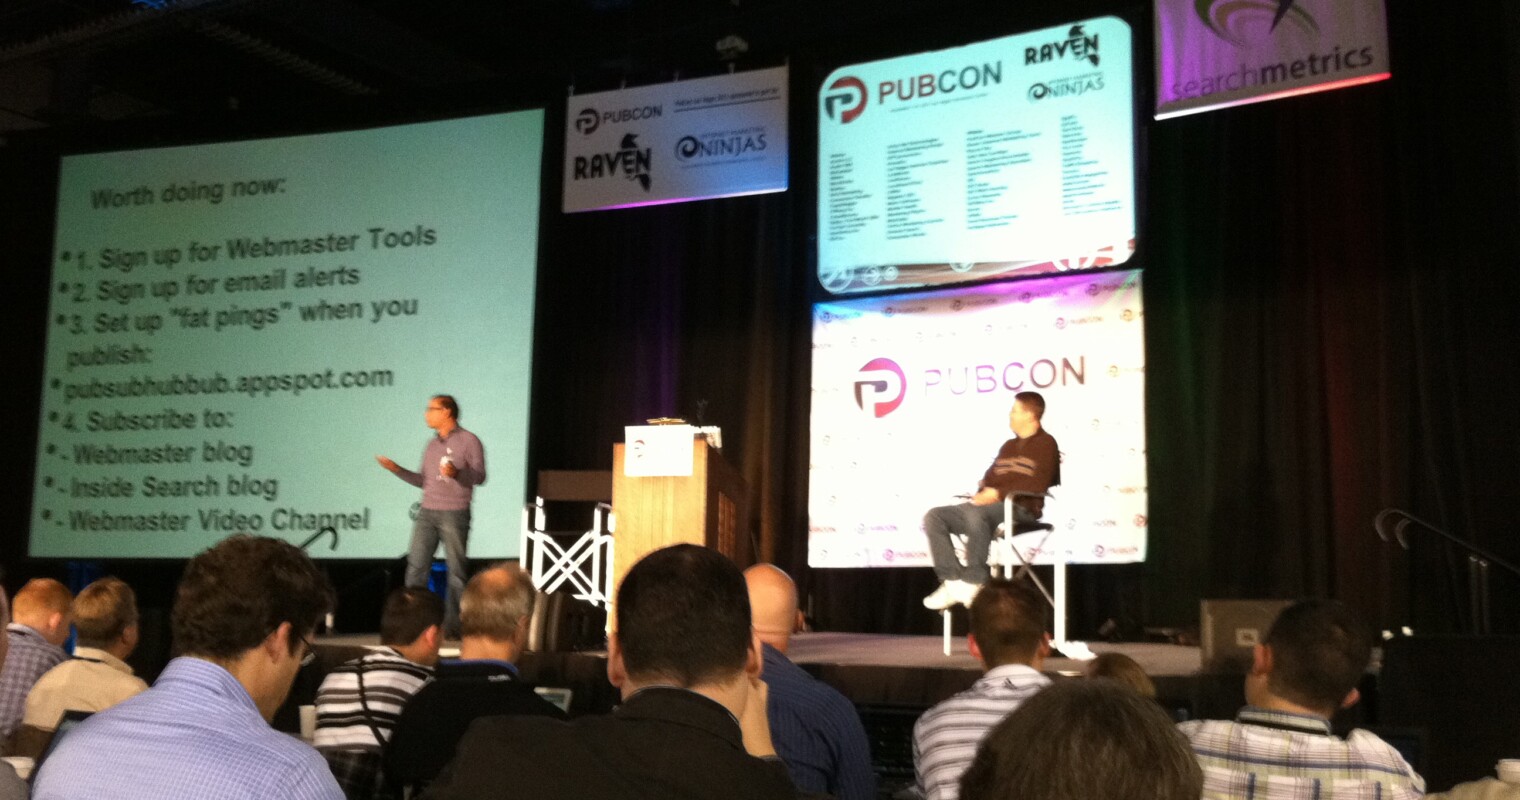 #pubcon Matt Cutts and Amit Singhal Answer Questions and Offer Advice